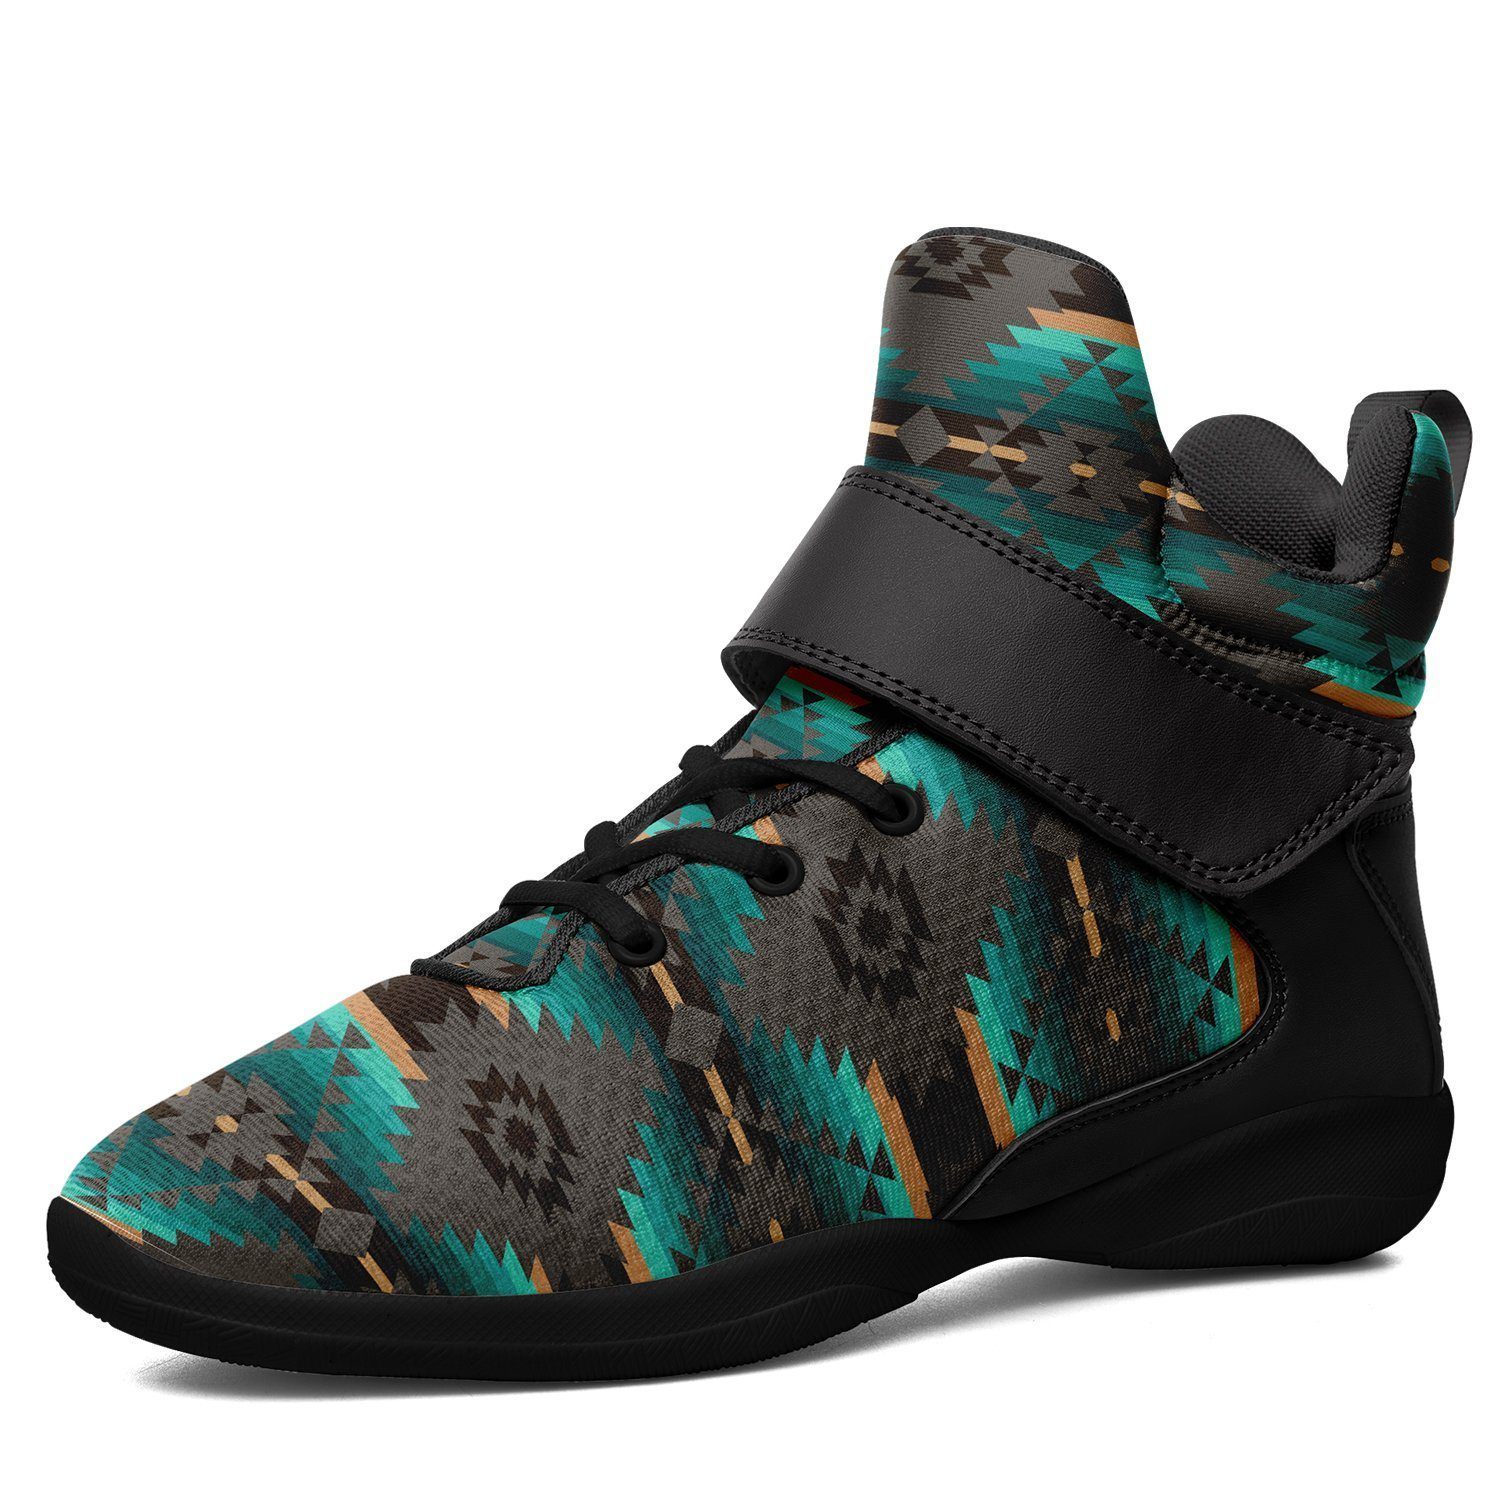 Cree Confederacy Ipottaa Basketball / Sport High Top Shoes - Black Sole 49 Dzine US Men 7 / EUR 40 Black Sole with Black Strap 